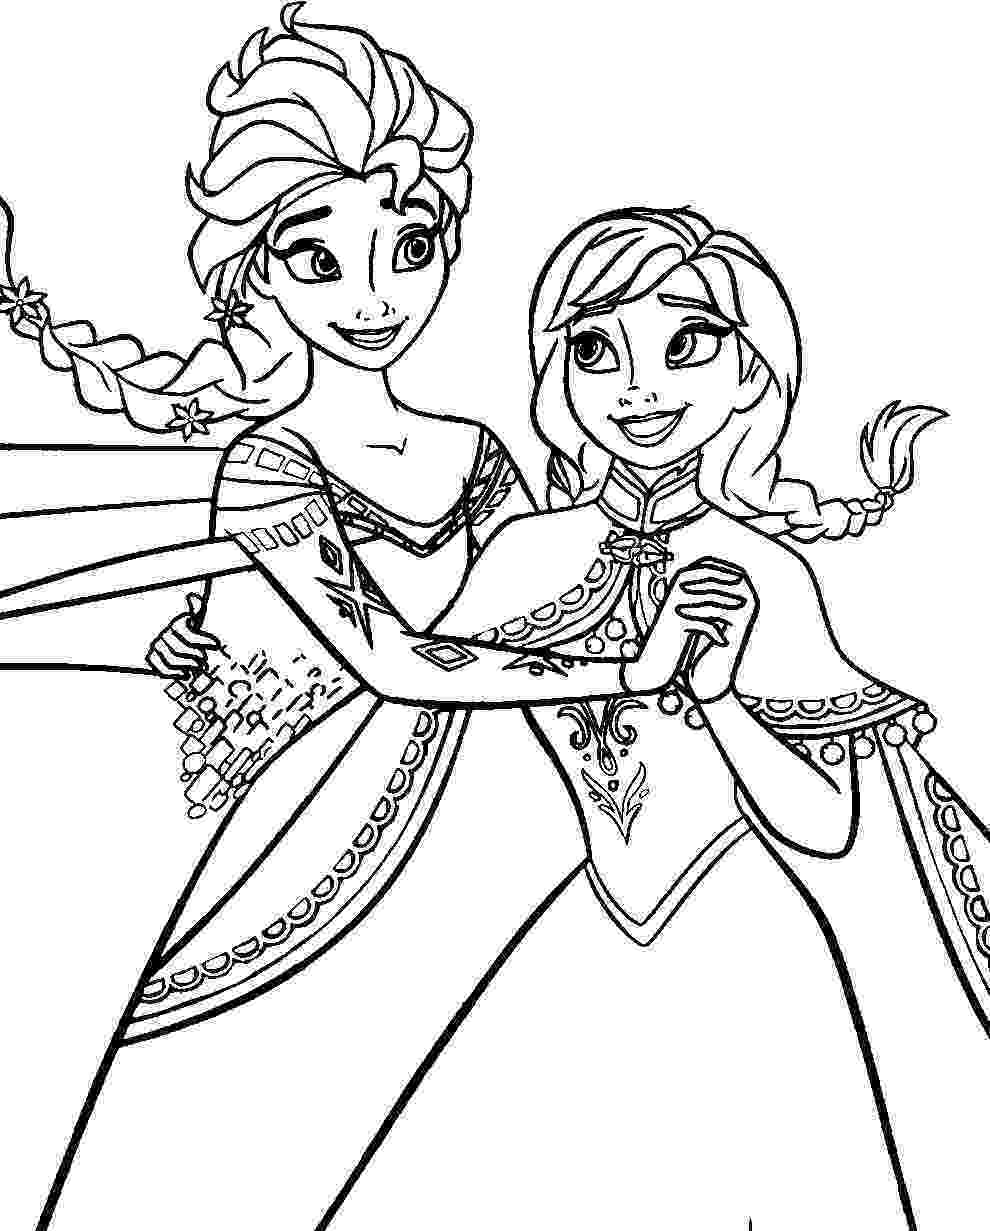 printable coloring pages of elsa from frozen frozen coloring pages getcoloringpagescom frozen coloring printable from elsa of pages 